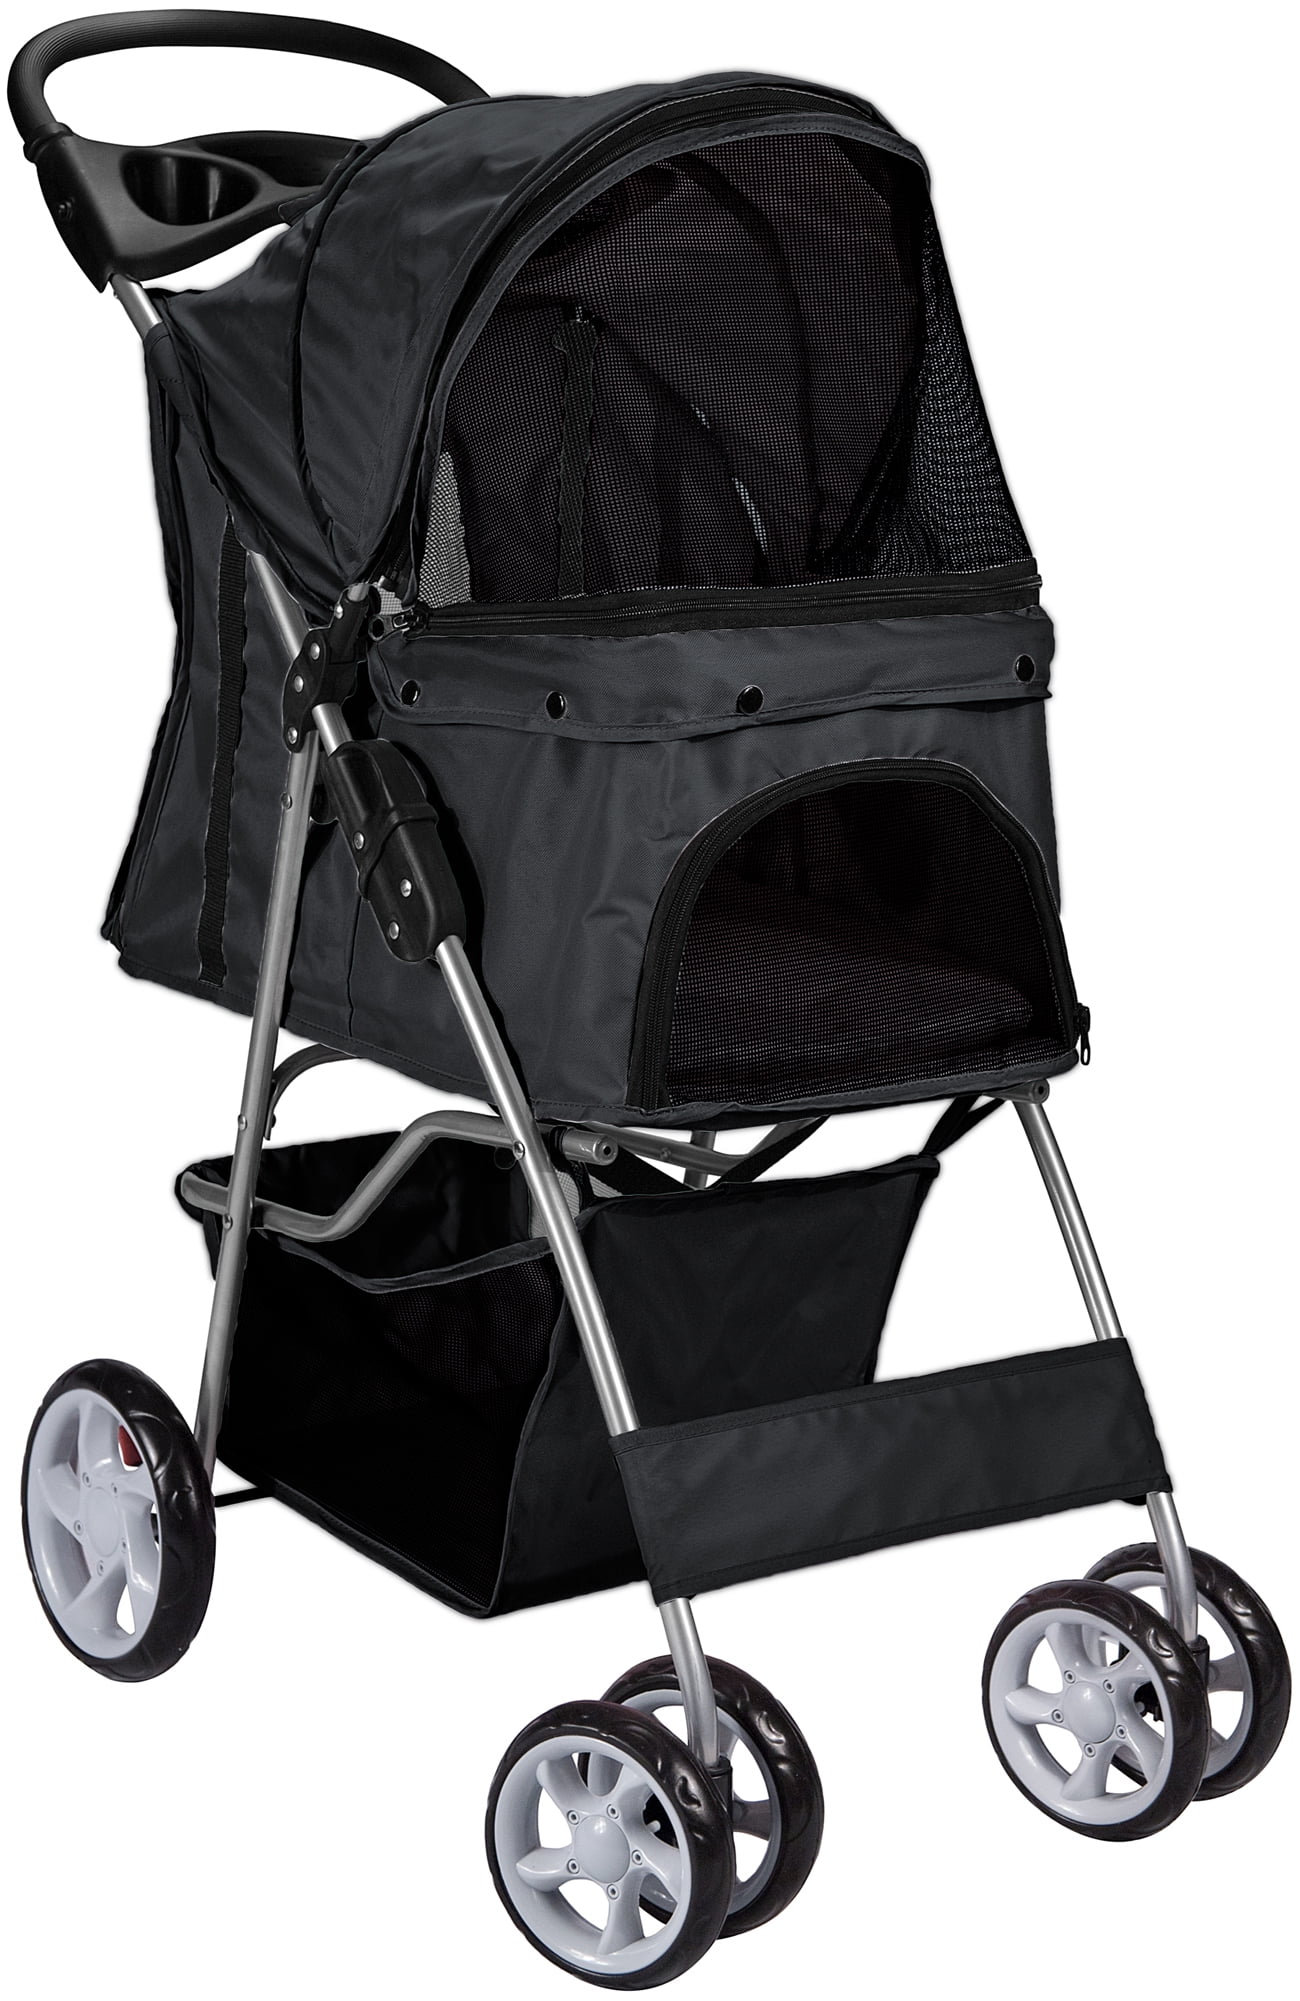 paws and pals double pet stroller